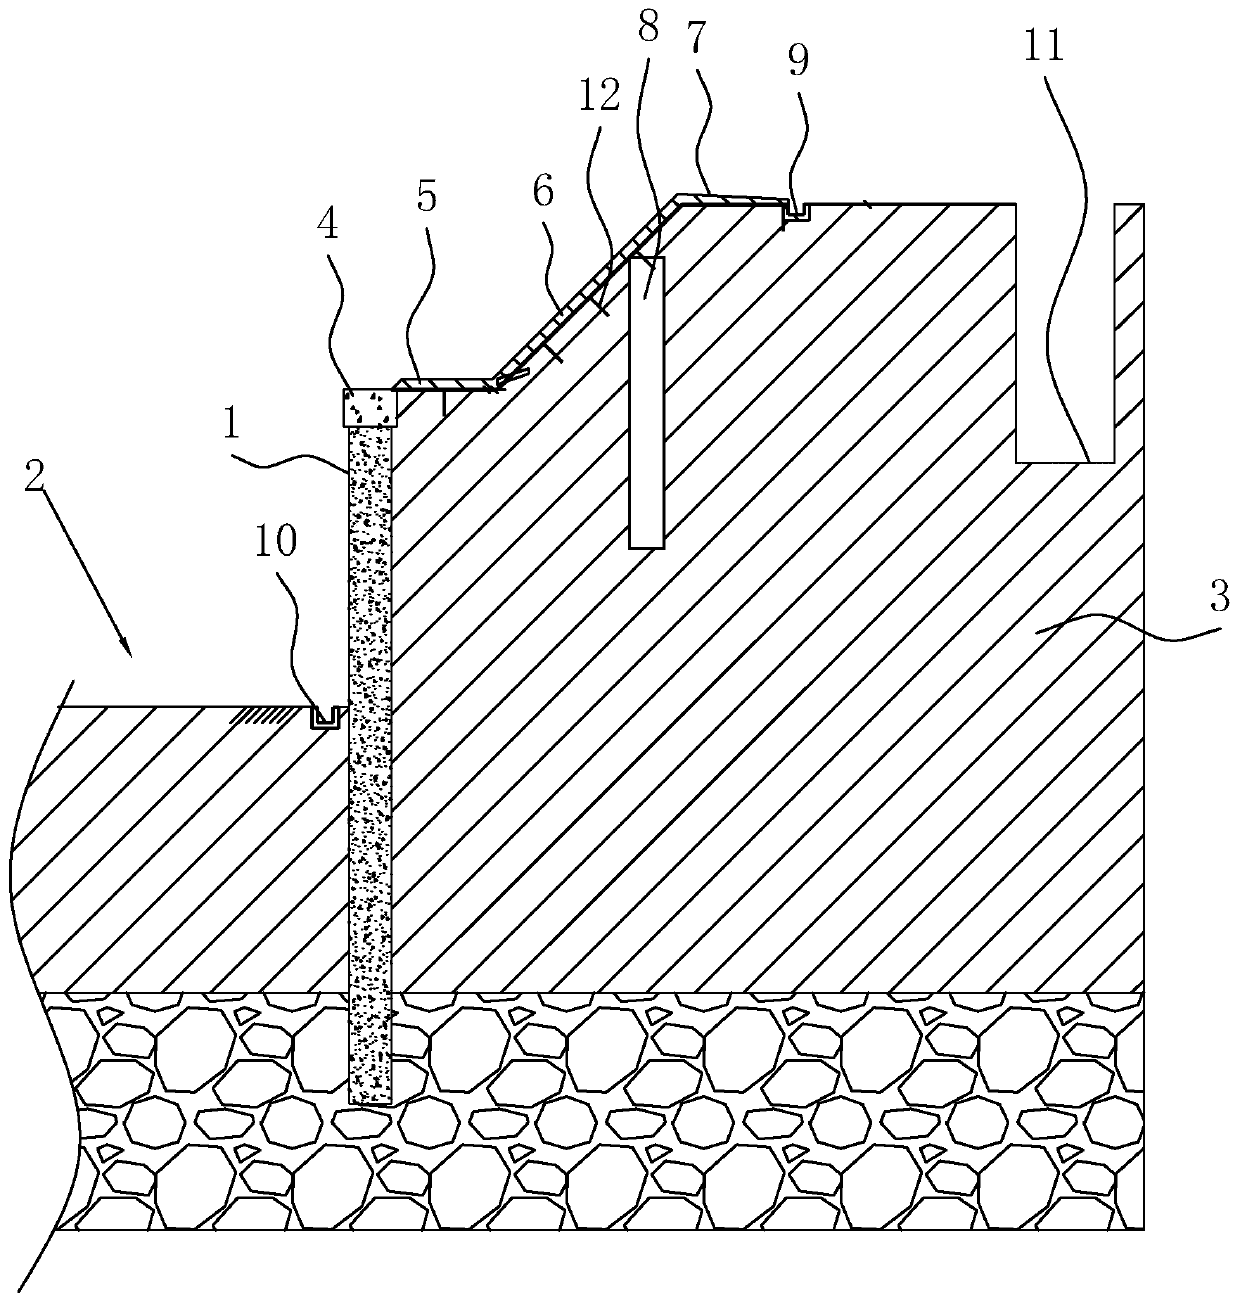 Foundation pit supporting structure and construction method